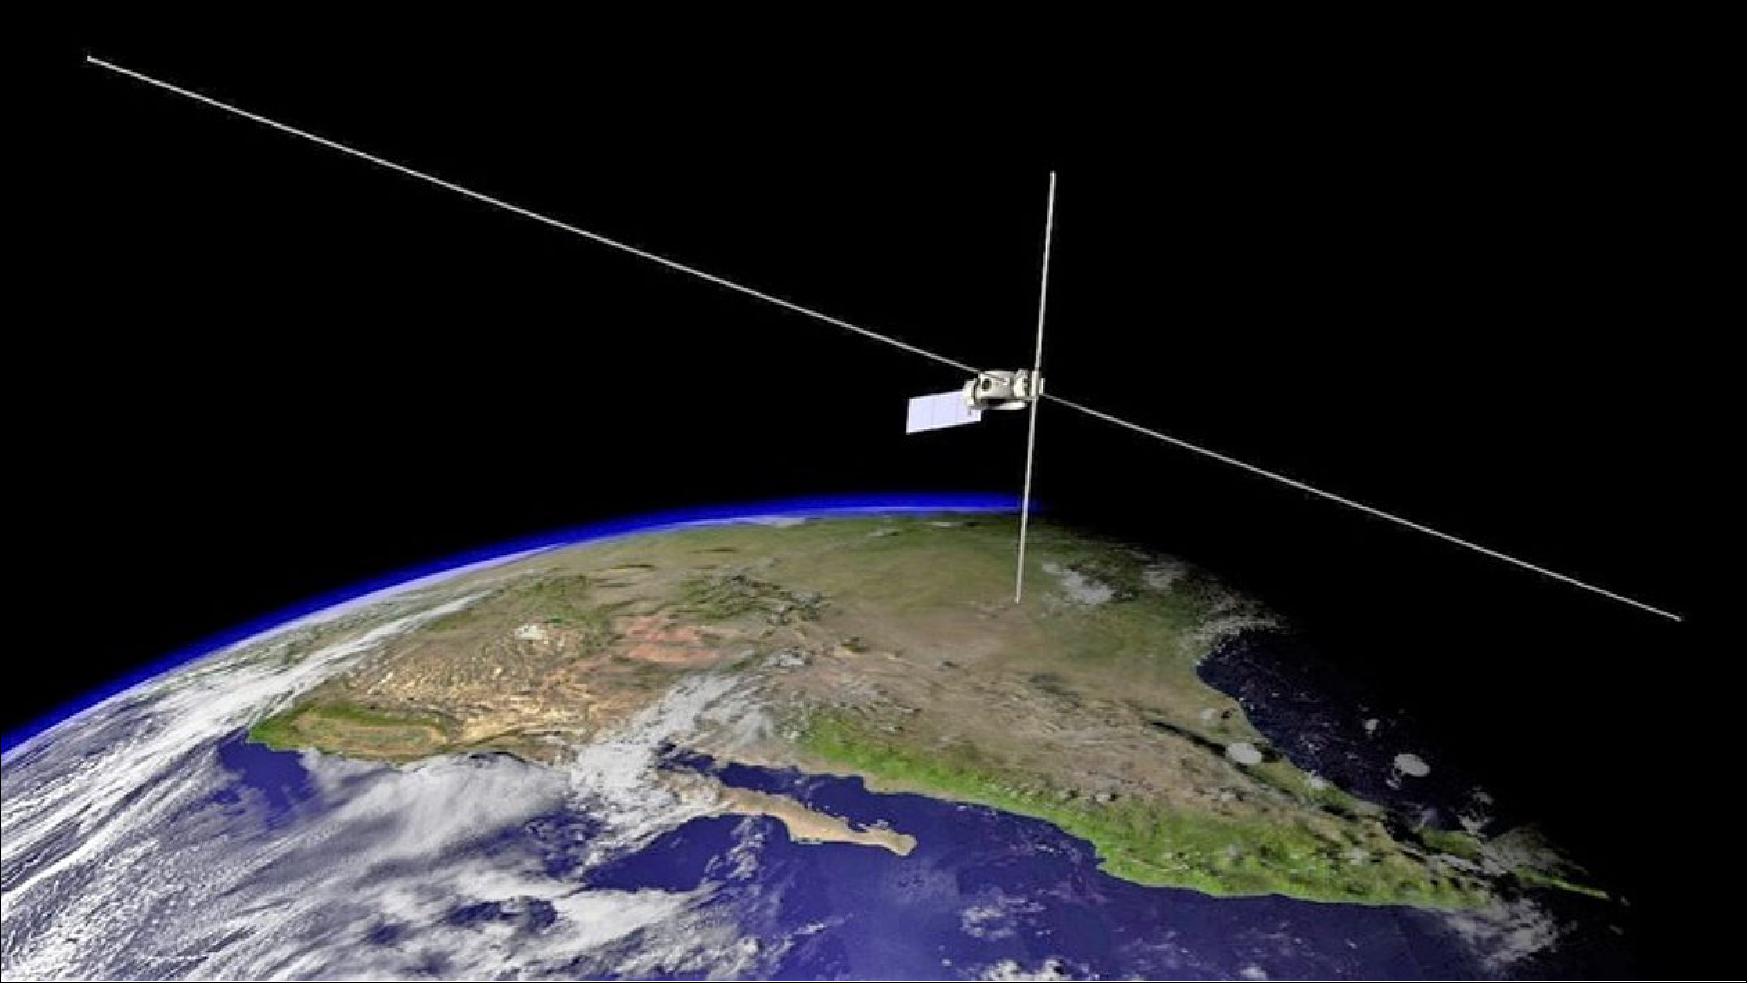 Figure 7: Artist’s rendering of the Air Force Research Laboratory DSX spacecraft on-orbit with its 80-meter and 16-meter antenna booms extended (image credit: USAF rendering by W Robert Johnston)